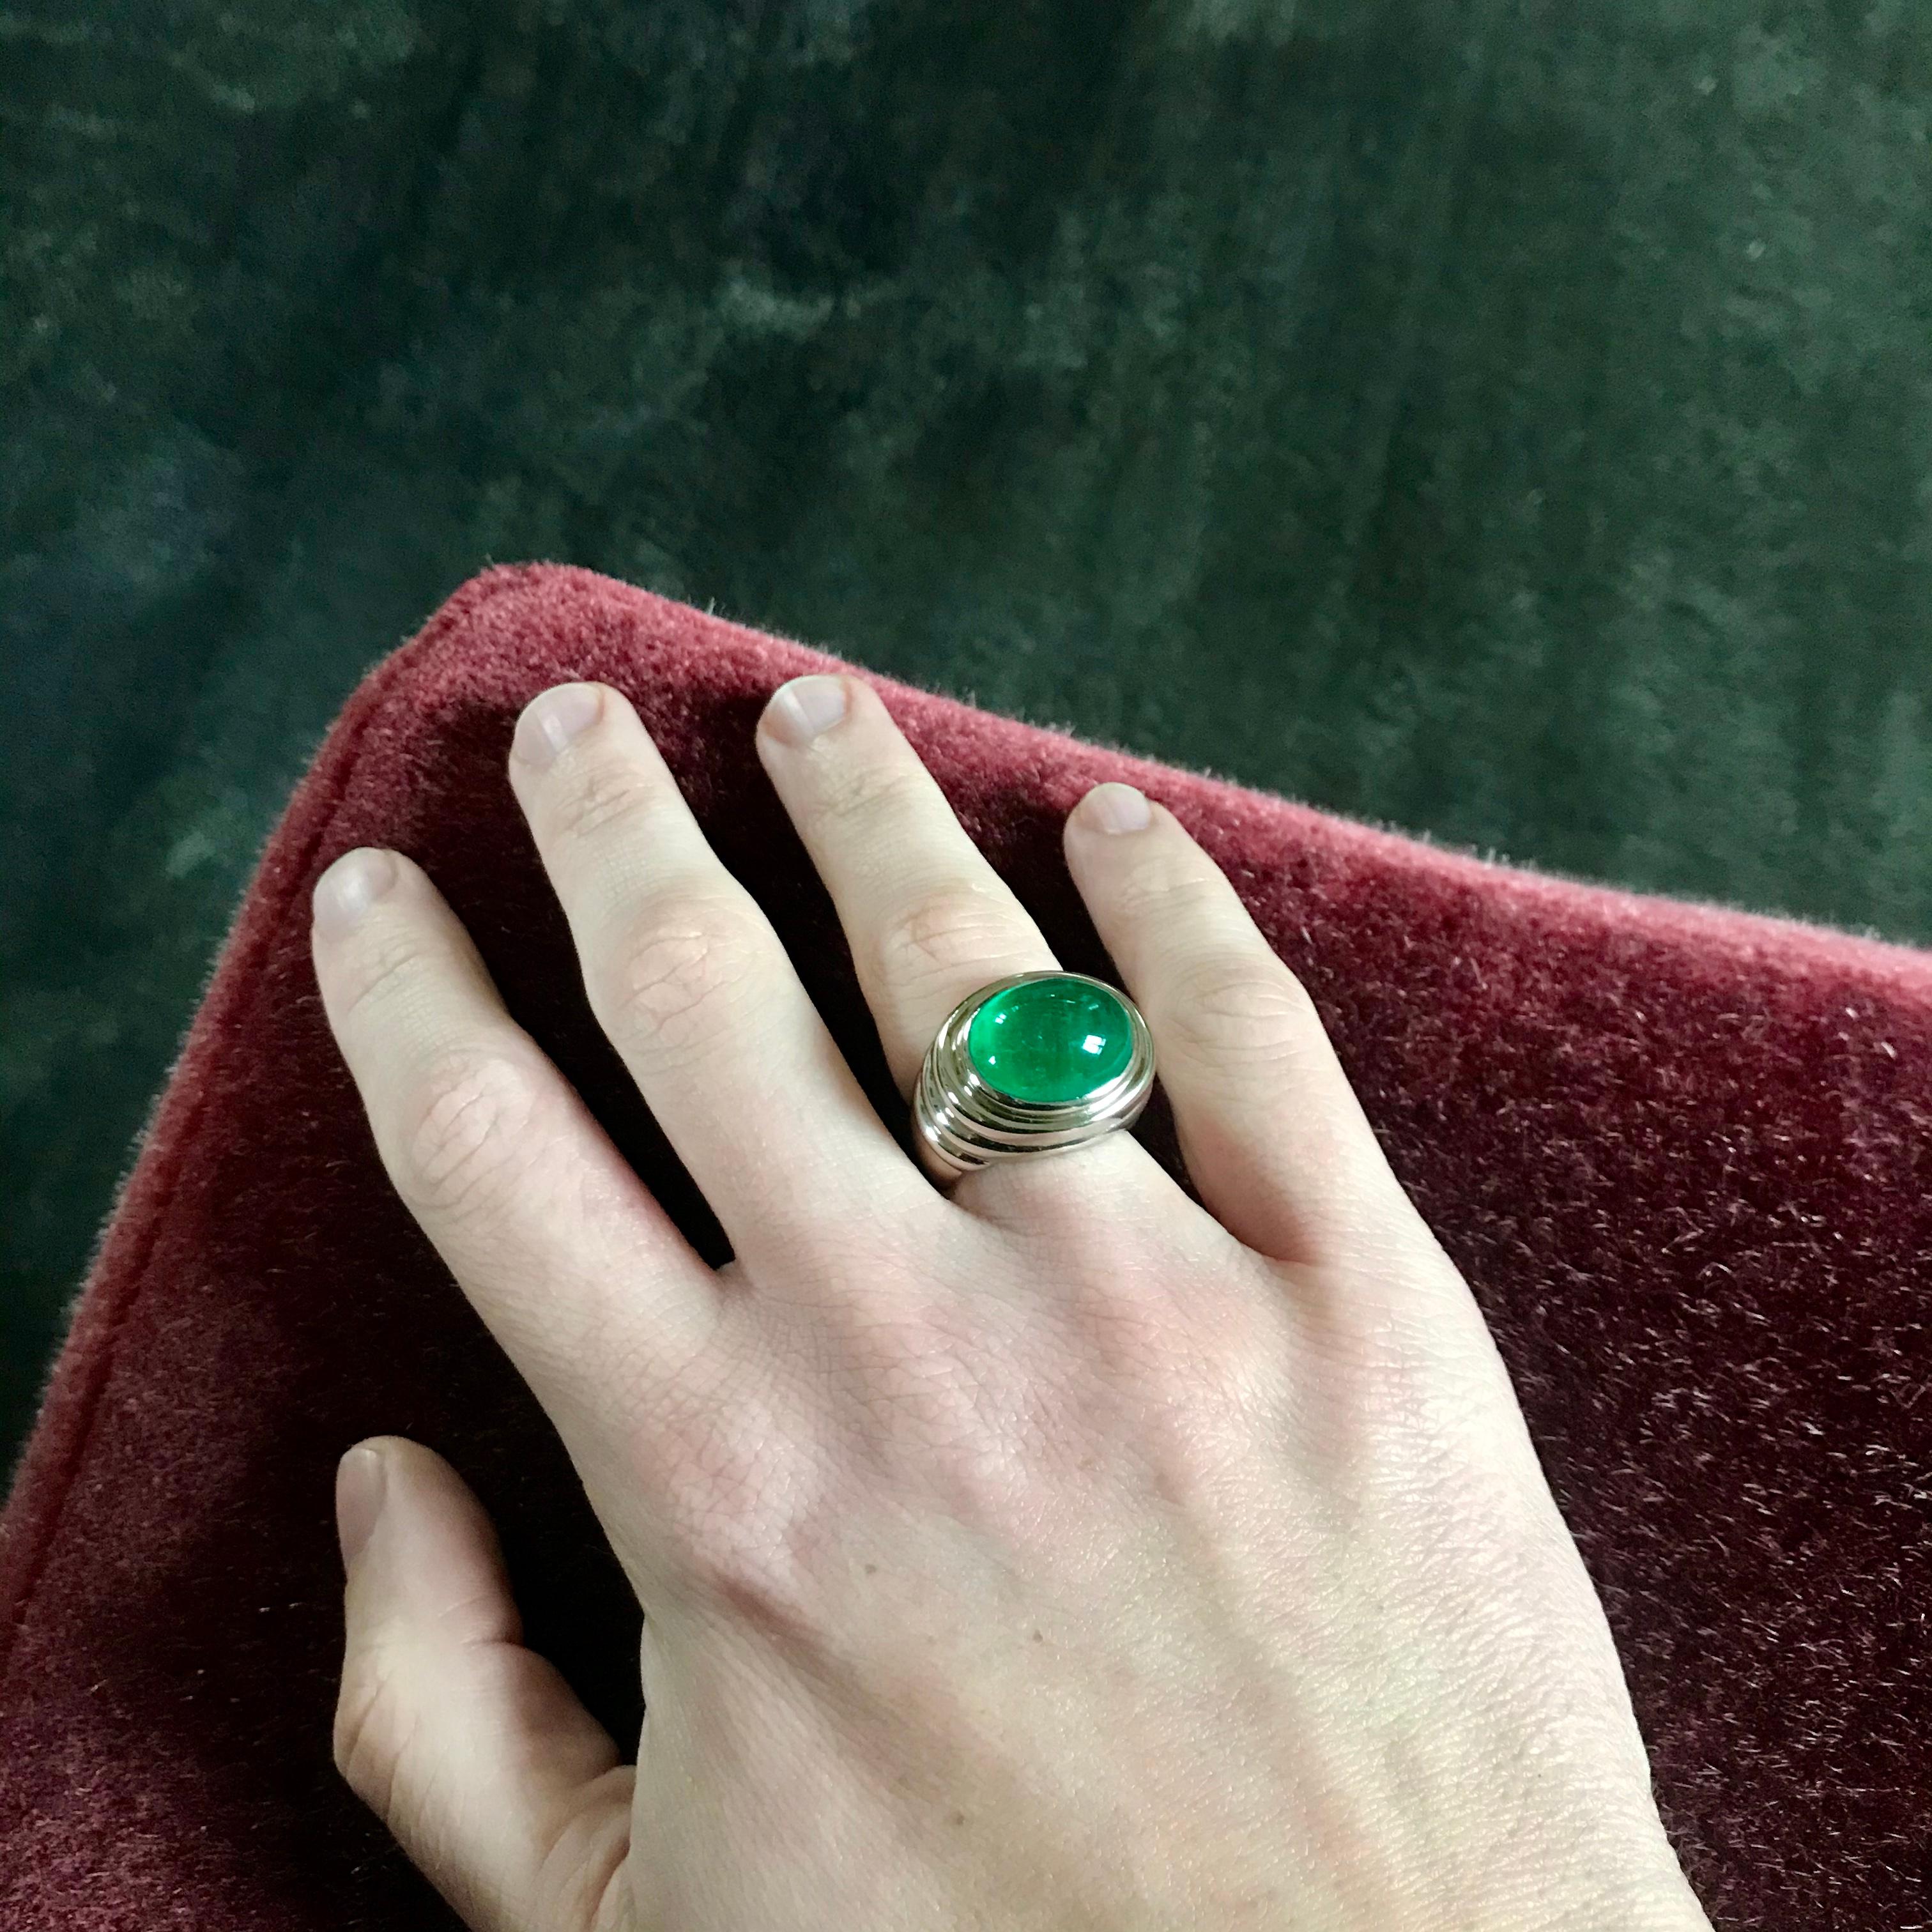 middle ages ring
18 carat white gold 
1 emerald 14.86 ct 

Inspired by the elements and shapes of the Middle Ages, the collection is one of the most coveted by Colleen B. Rosenblat. Delicate yet bold crosses and stepped rings with large, coloured